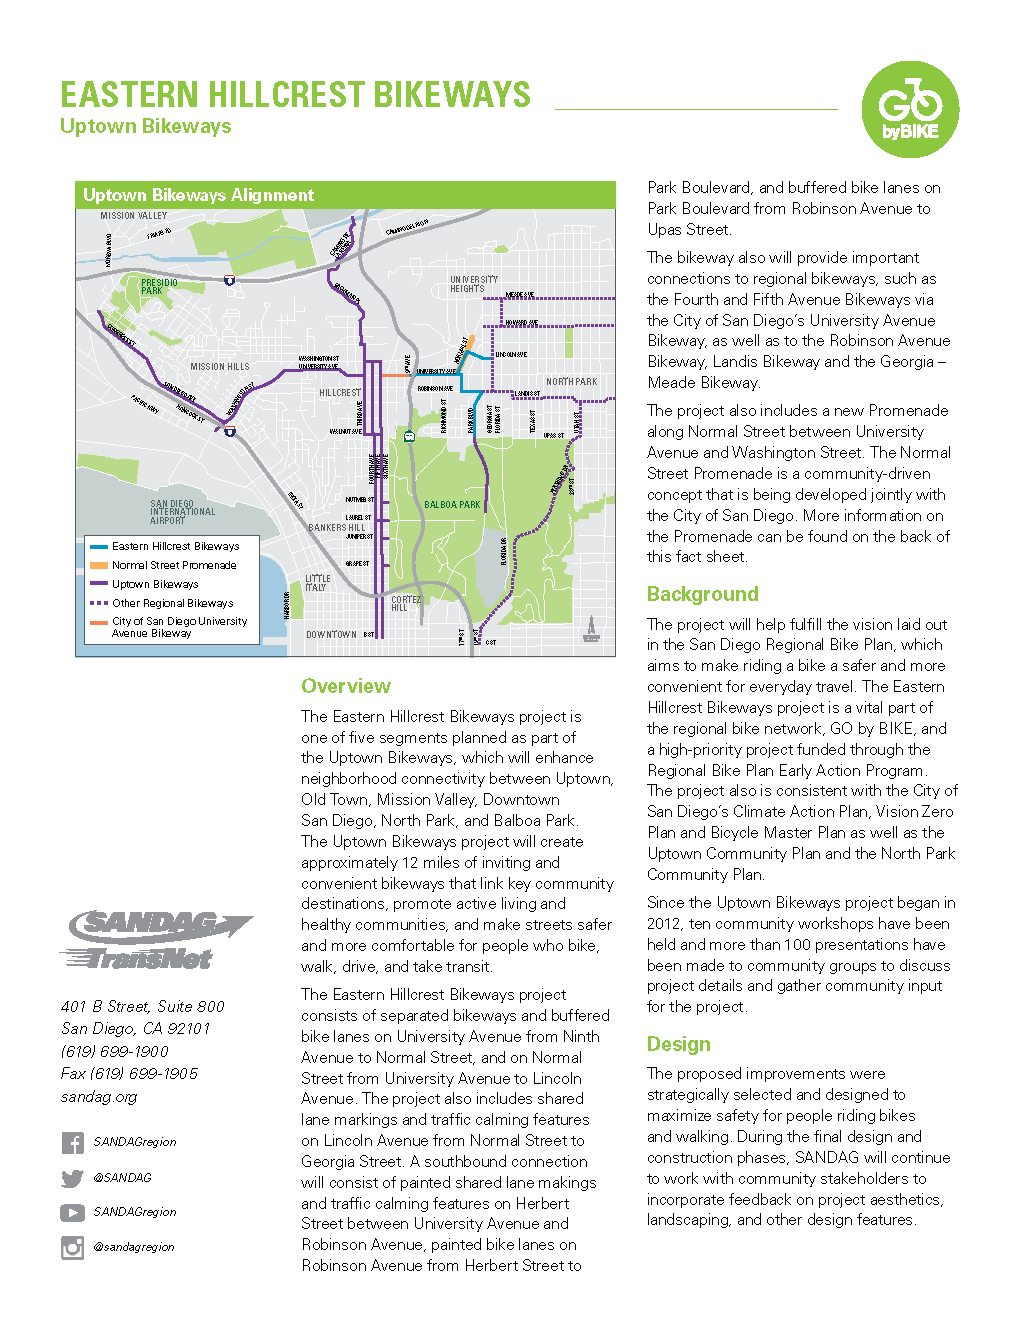 View the Eastern Hillcrest Bikeways project fact sheet in English.